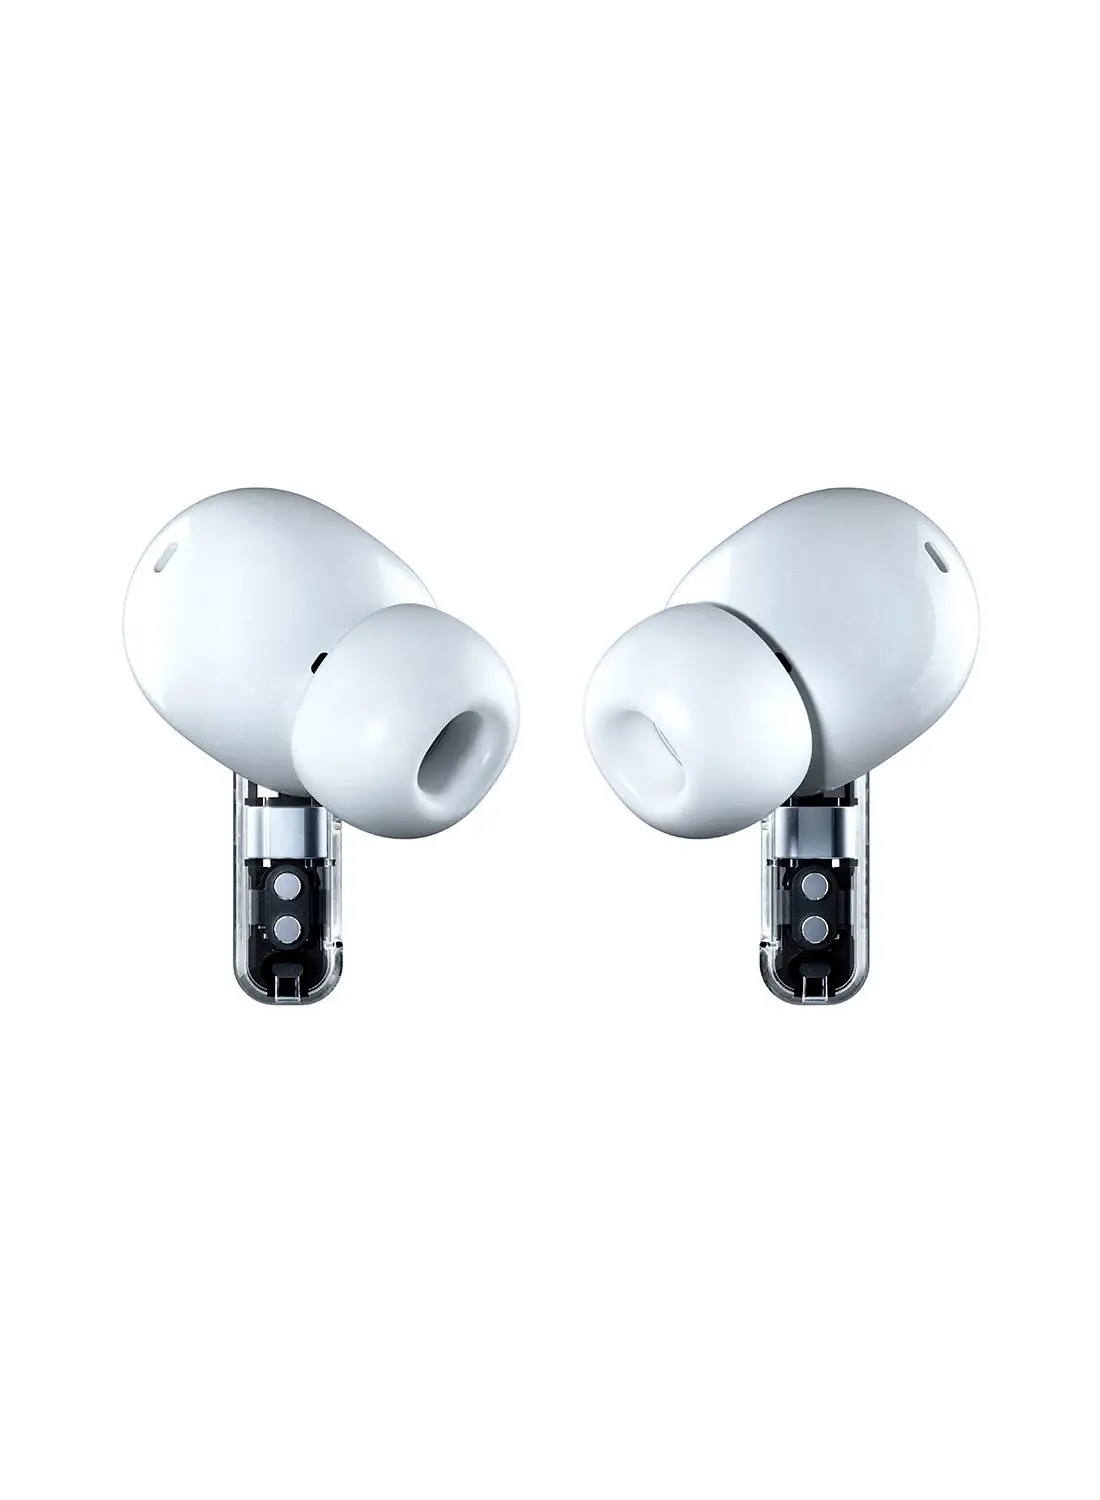 Nothing Ear (2) True wireless (TWS) Noise Cancelling Earbuds White